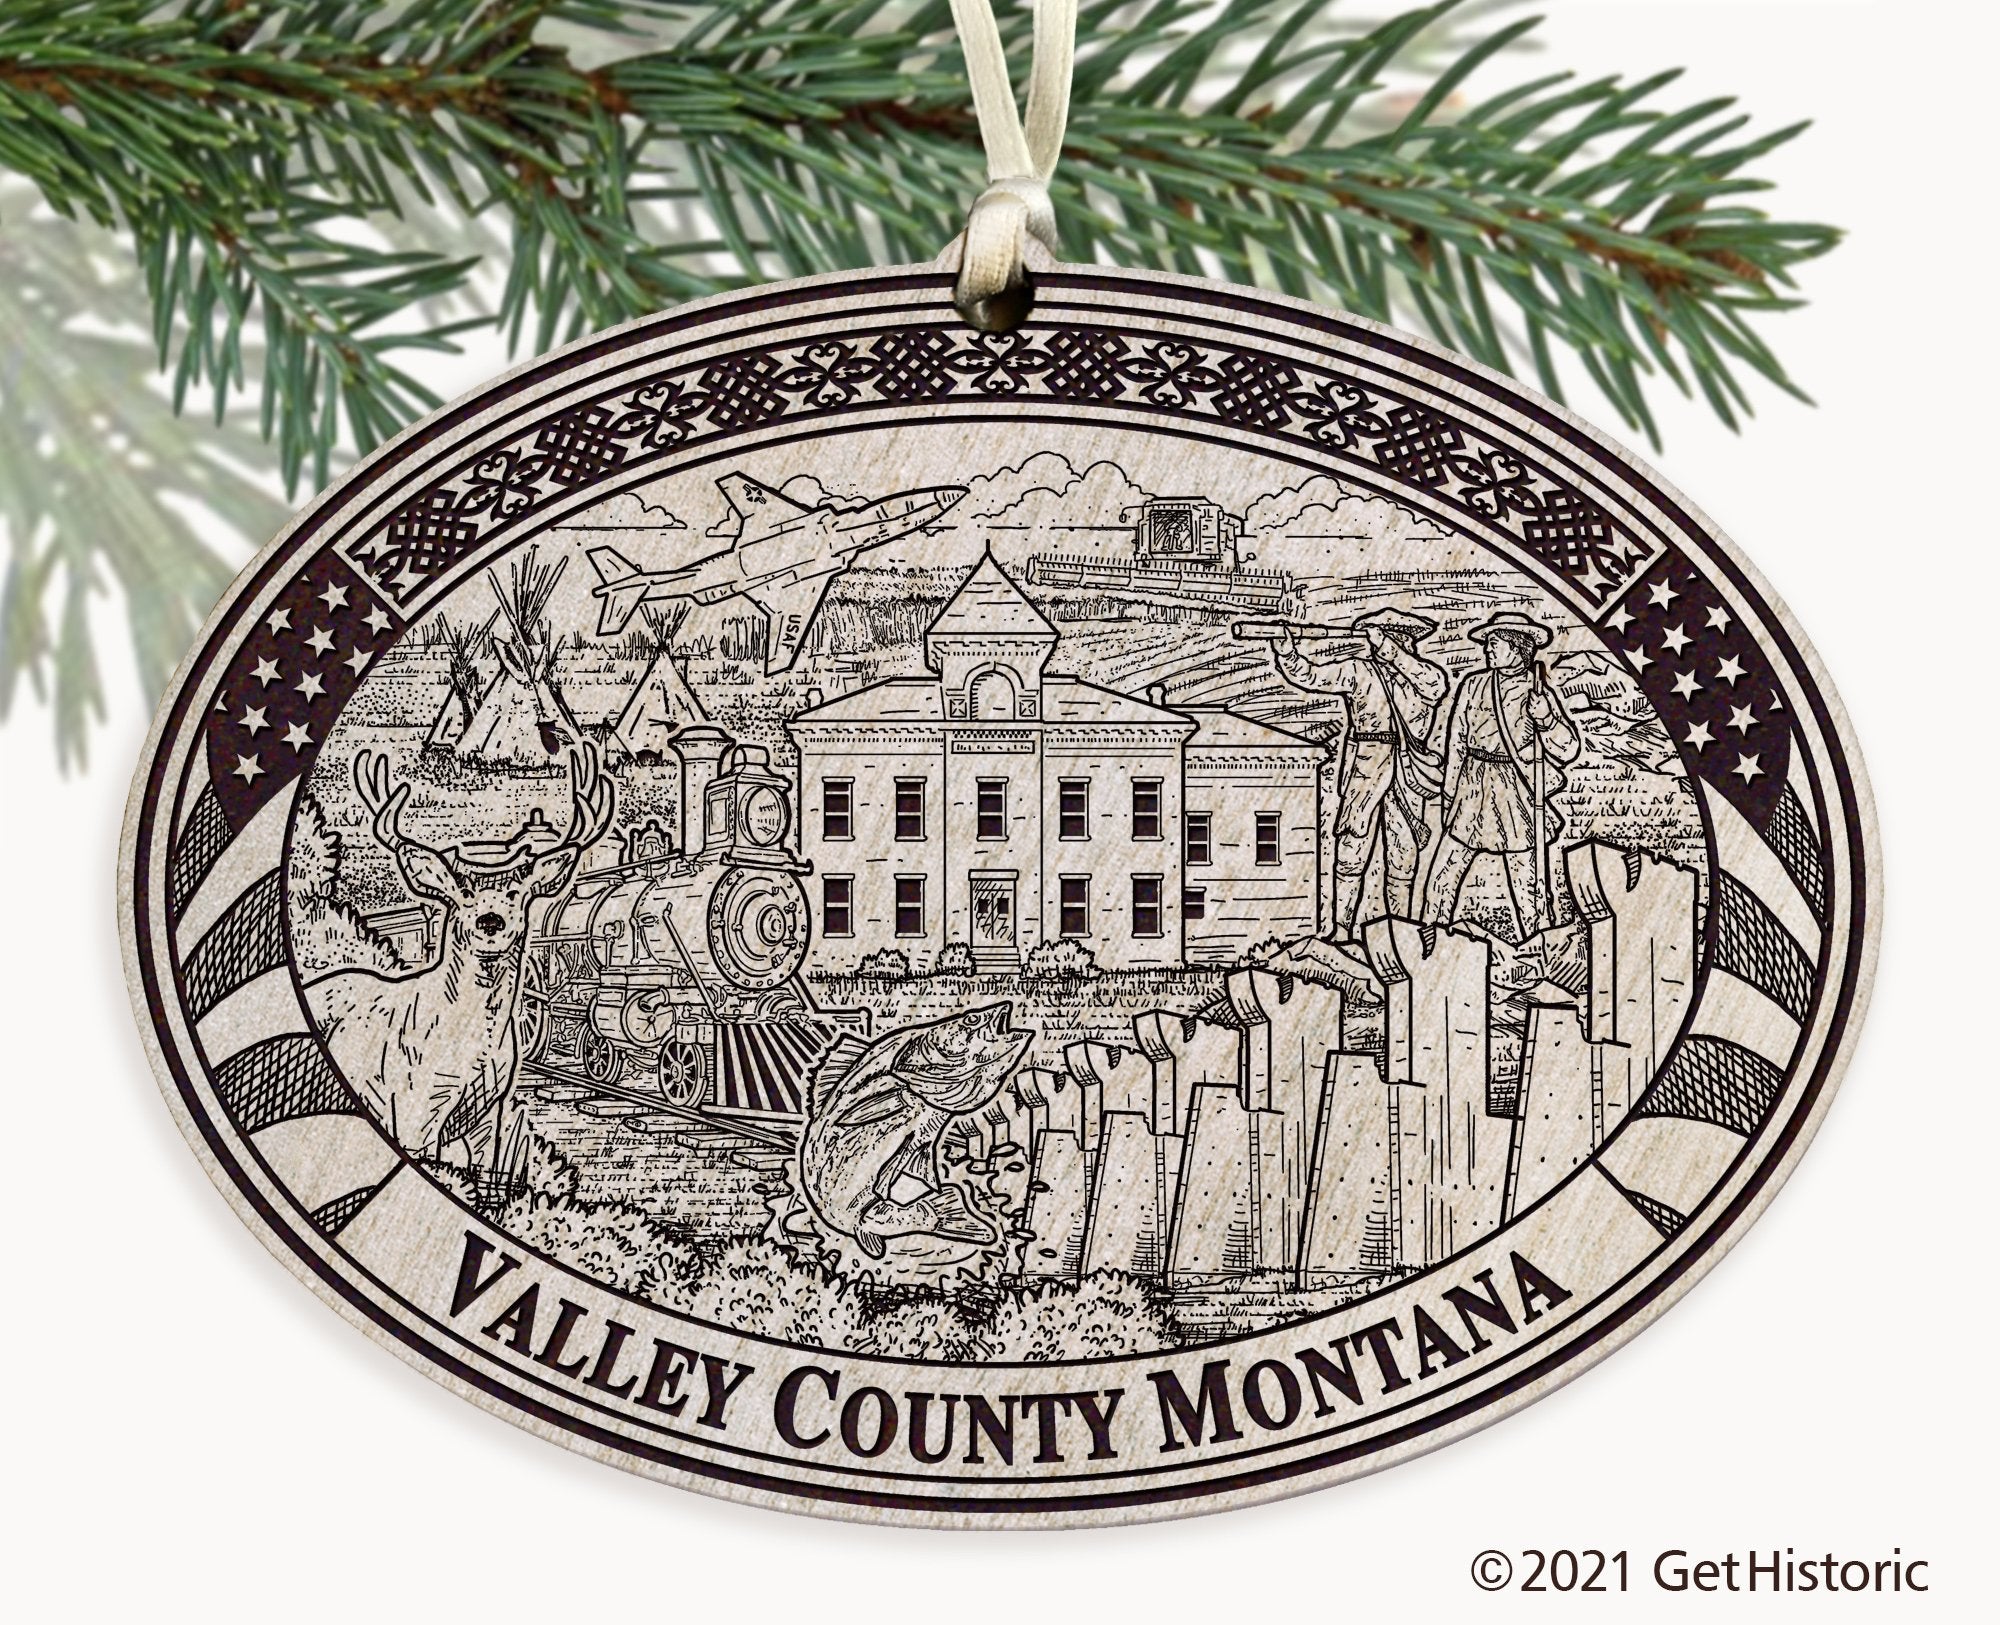 Valley County Montana Engraved Ornament